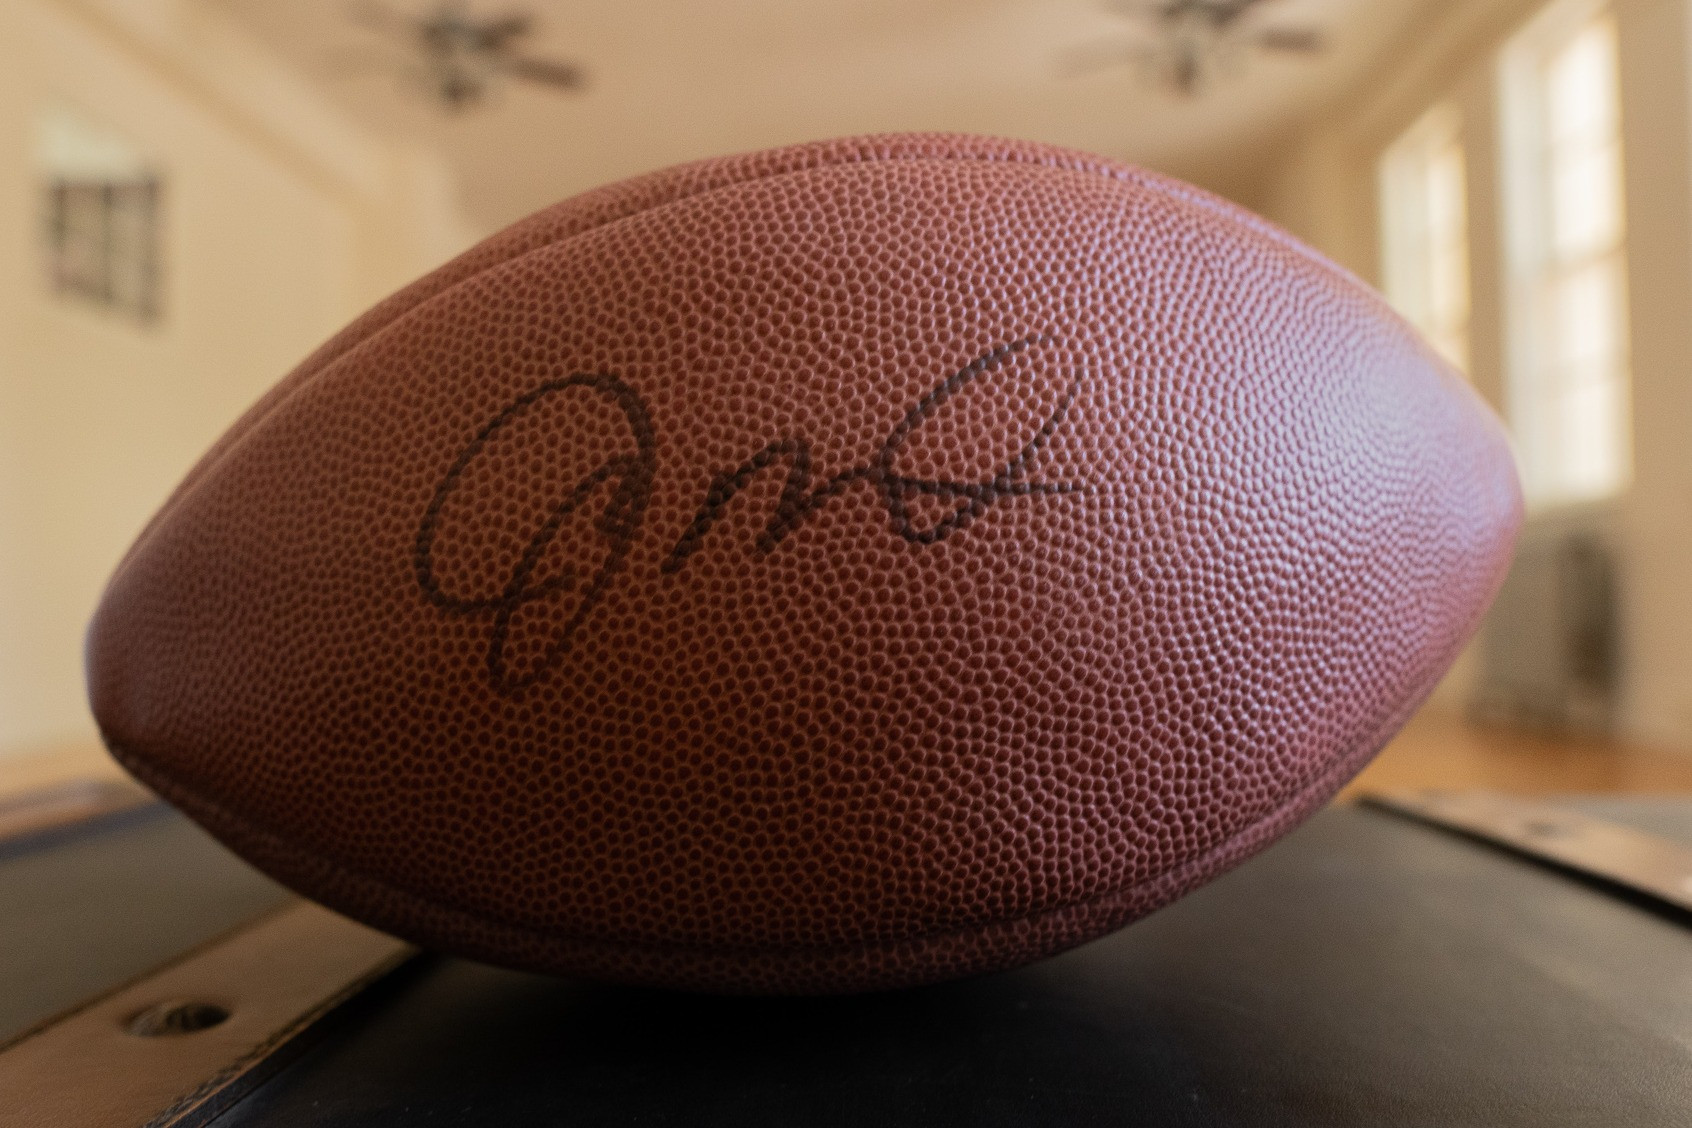 Wilson Official NFL Football autographed by four time Super Bowl Champ, two time MVP and Hall of Fame Winner Joe Montana.